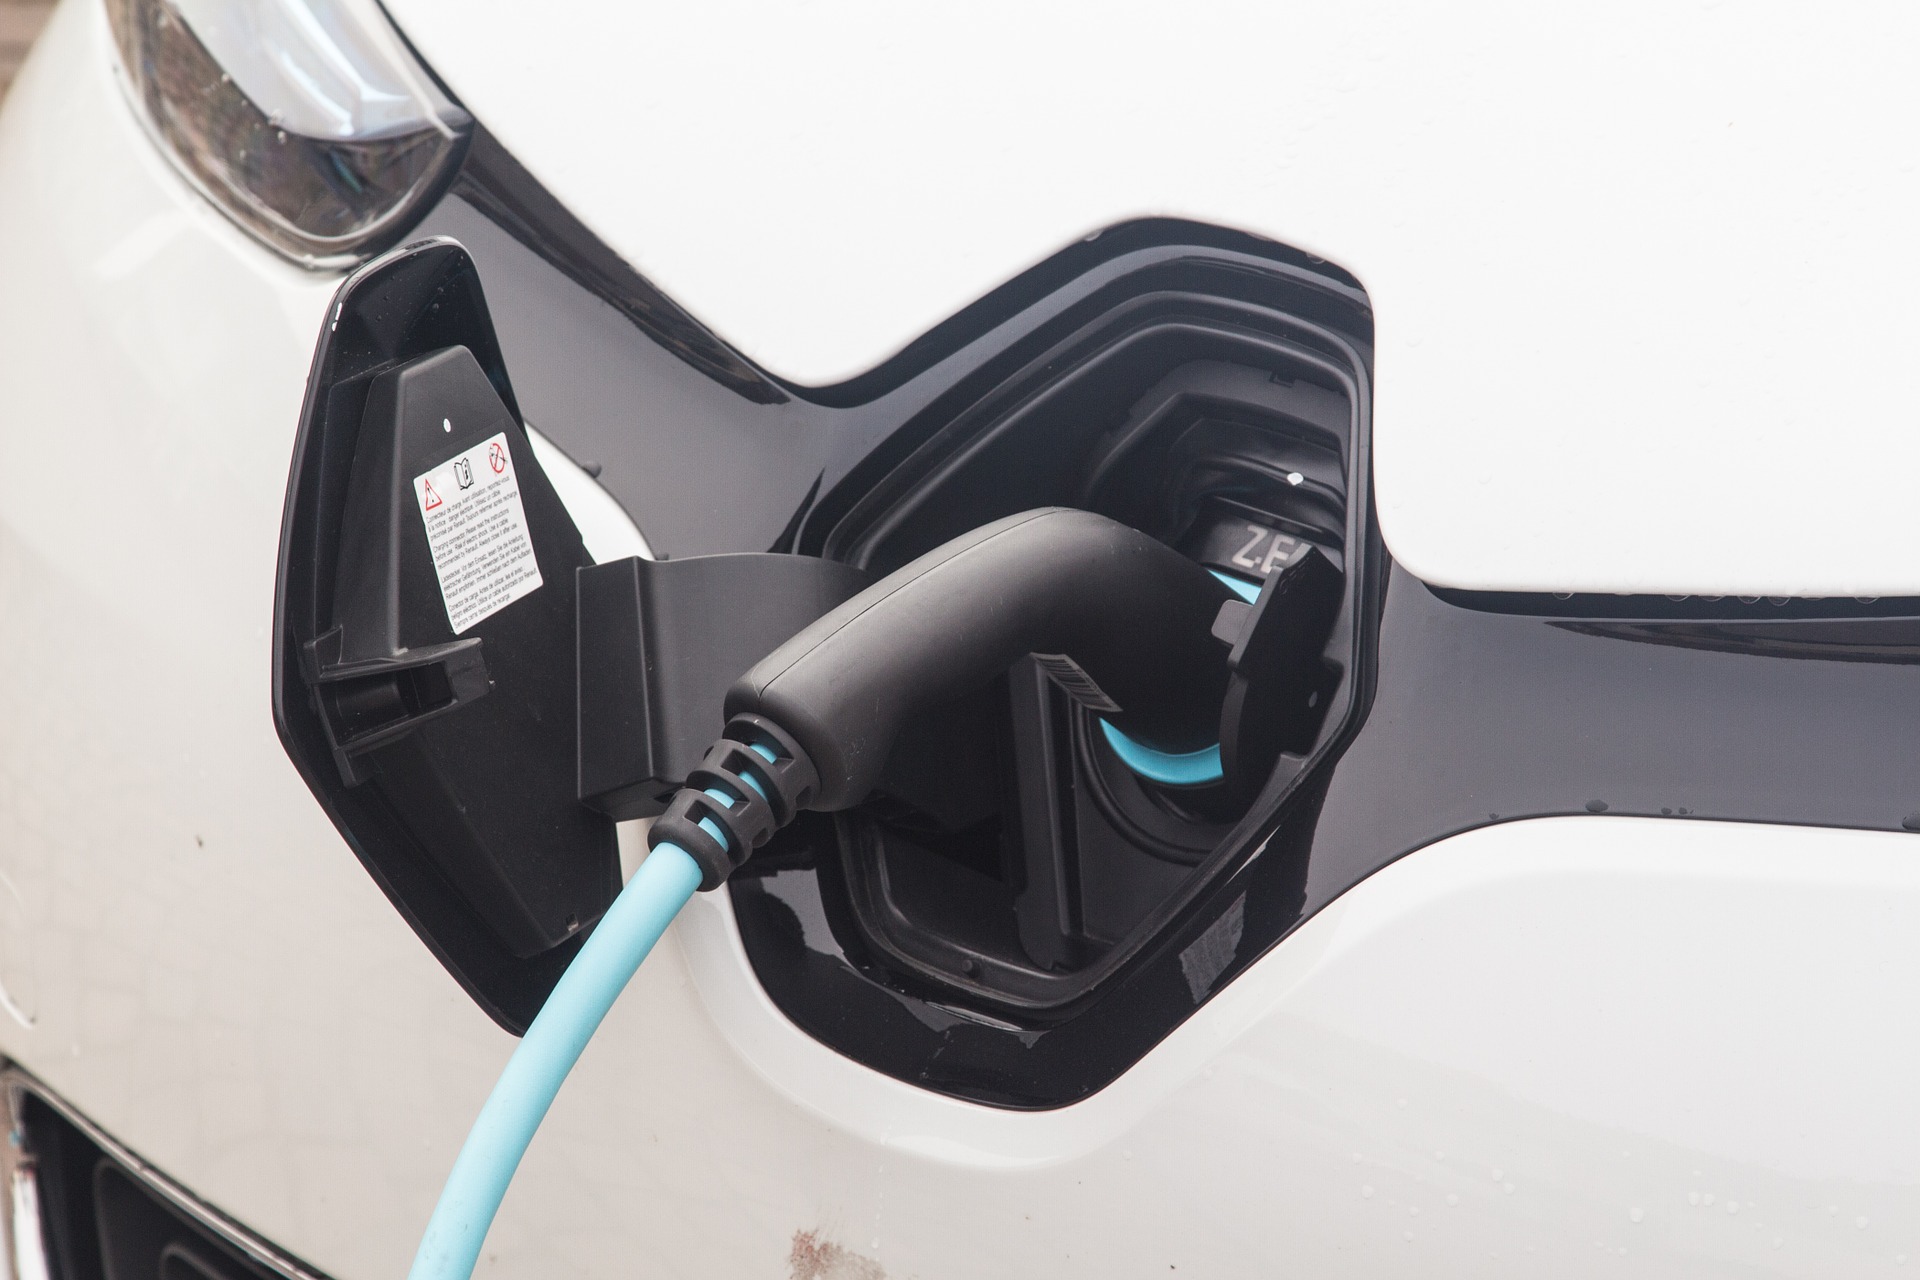 New business models for electromobility